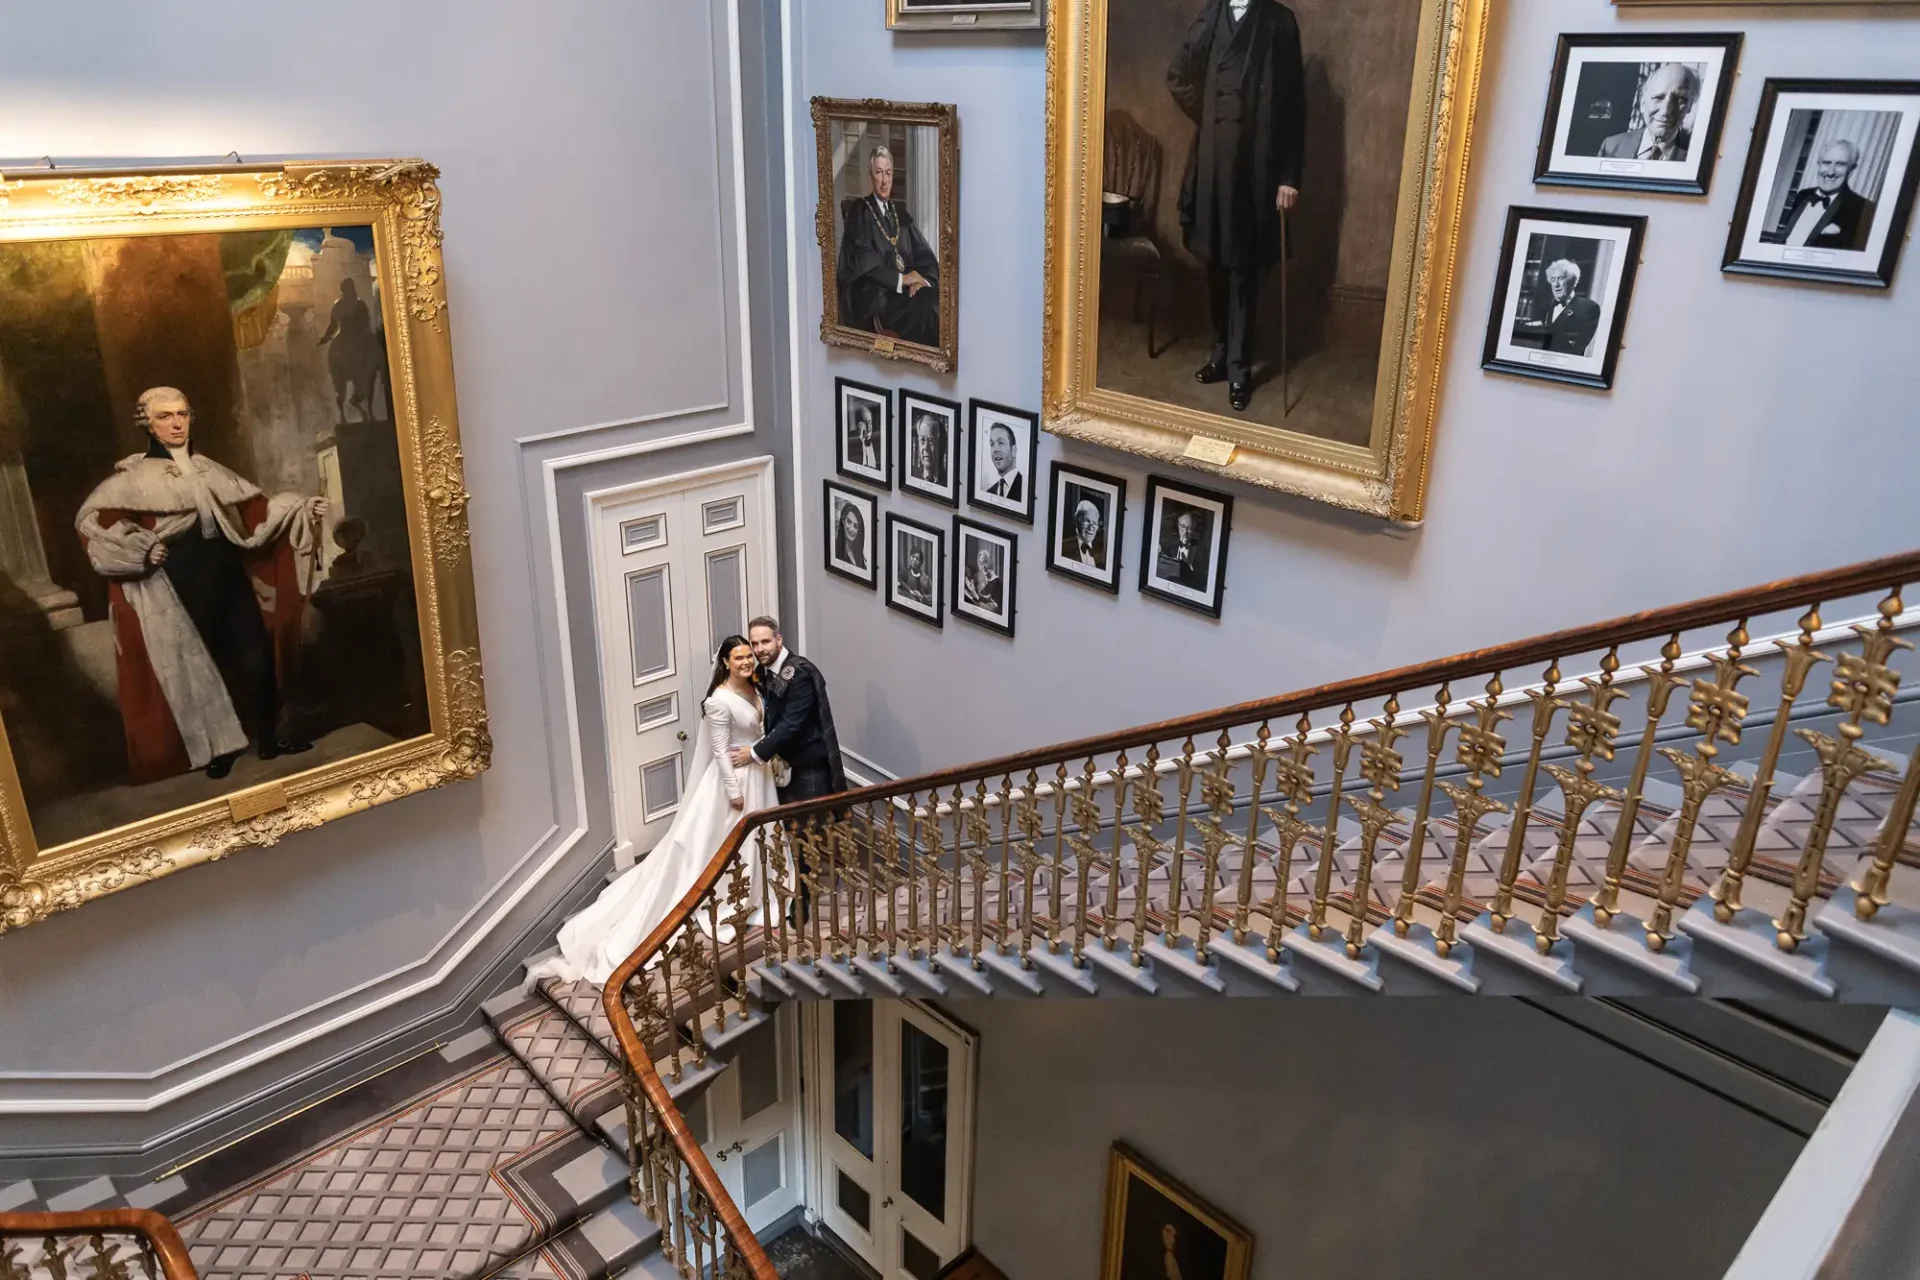 A couple poses on a grand staircase surrounded by numerous framed portraits hanging on the walls in an elegant building.